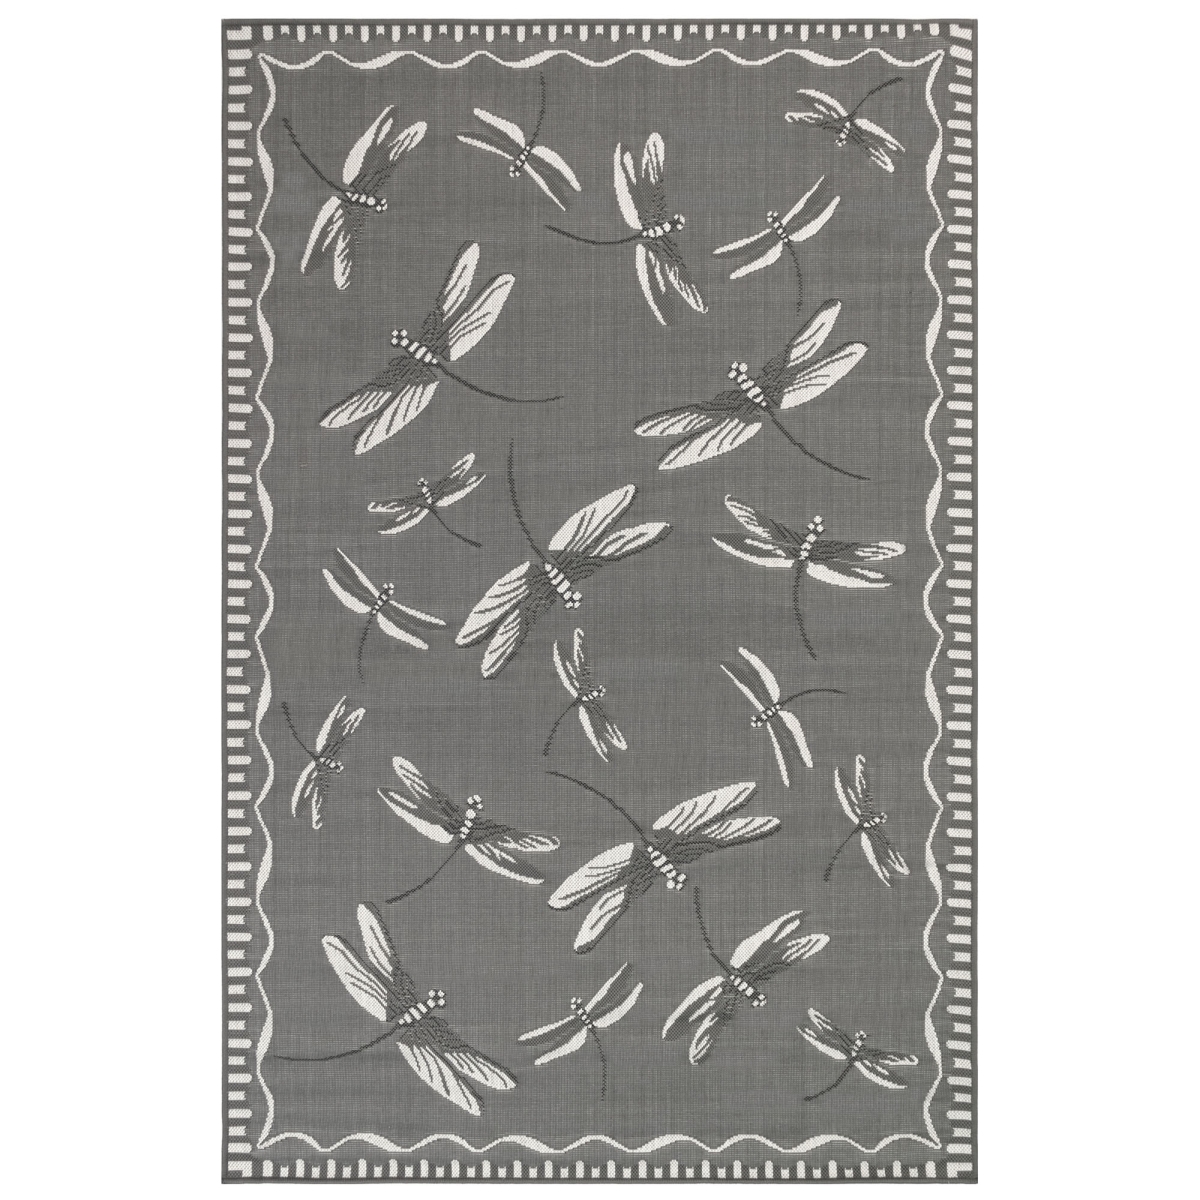 Cre69844097 Liora Manne Carmel Dragonfly Indoor & Outdoor Rug, Grey - 6 Ft. 6 In. X 9 Ft. 4 In.